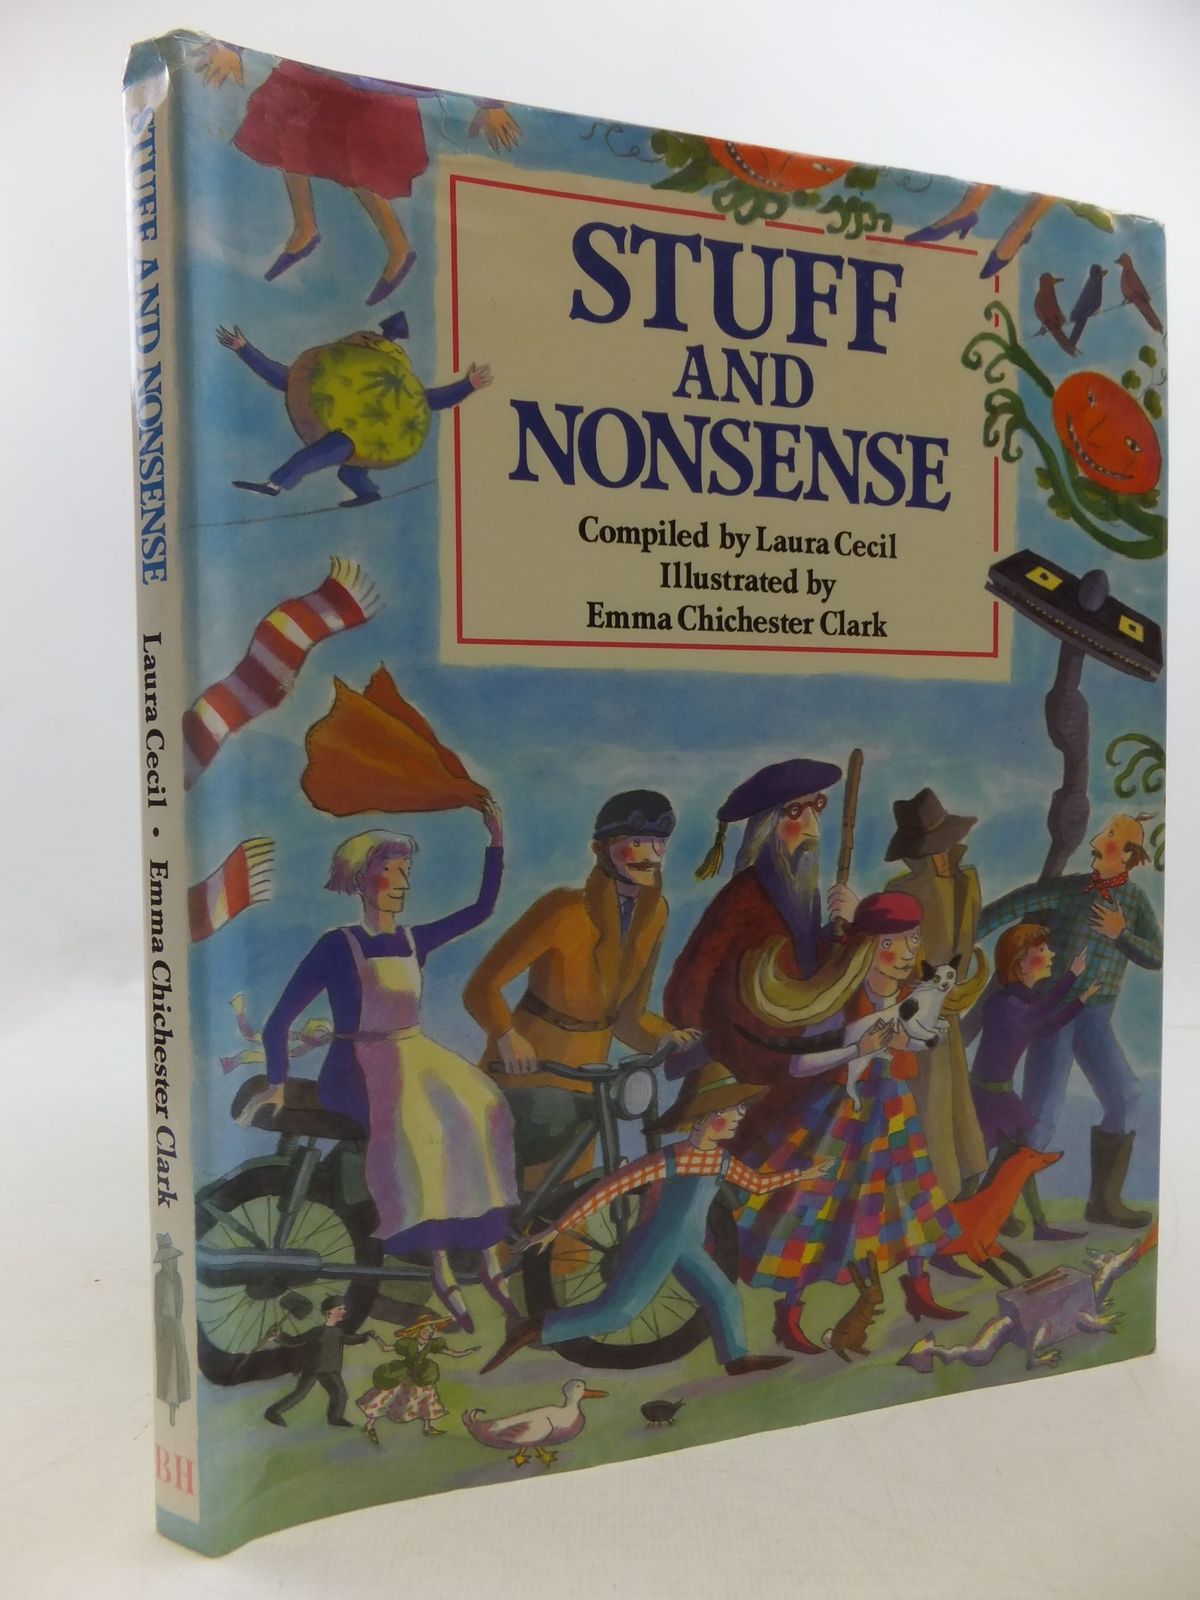 Photo of STUFF AND NONSENSE written by Cecil, Laura illustrated by Clark, Emma Chichester published by The Bodley Head (STOCK CODE: 2112374)  for sale by Stella & Rose's Books